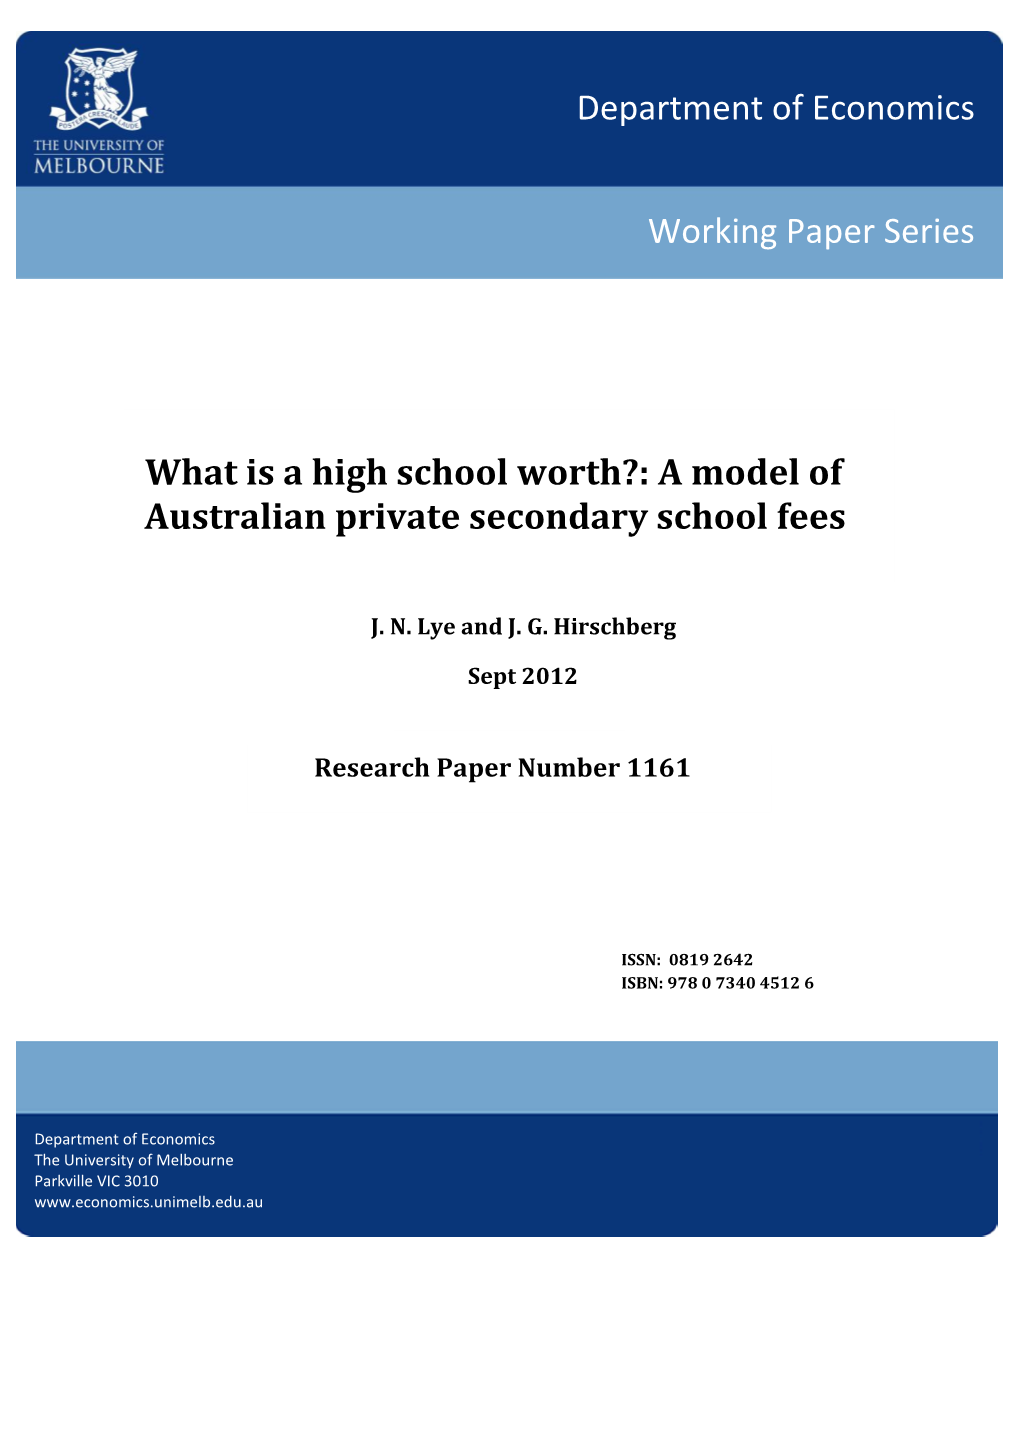 A Model of Australian Private Secondary School Fees